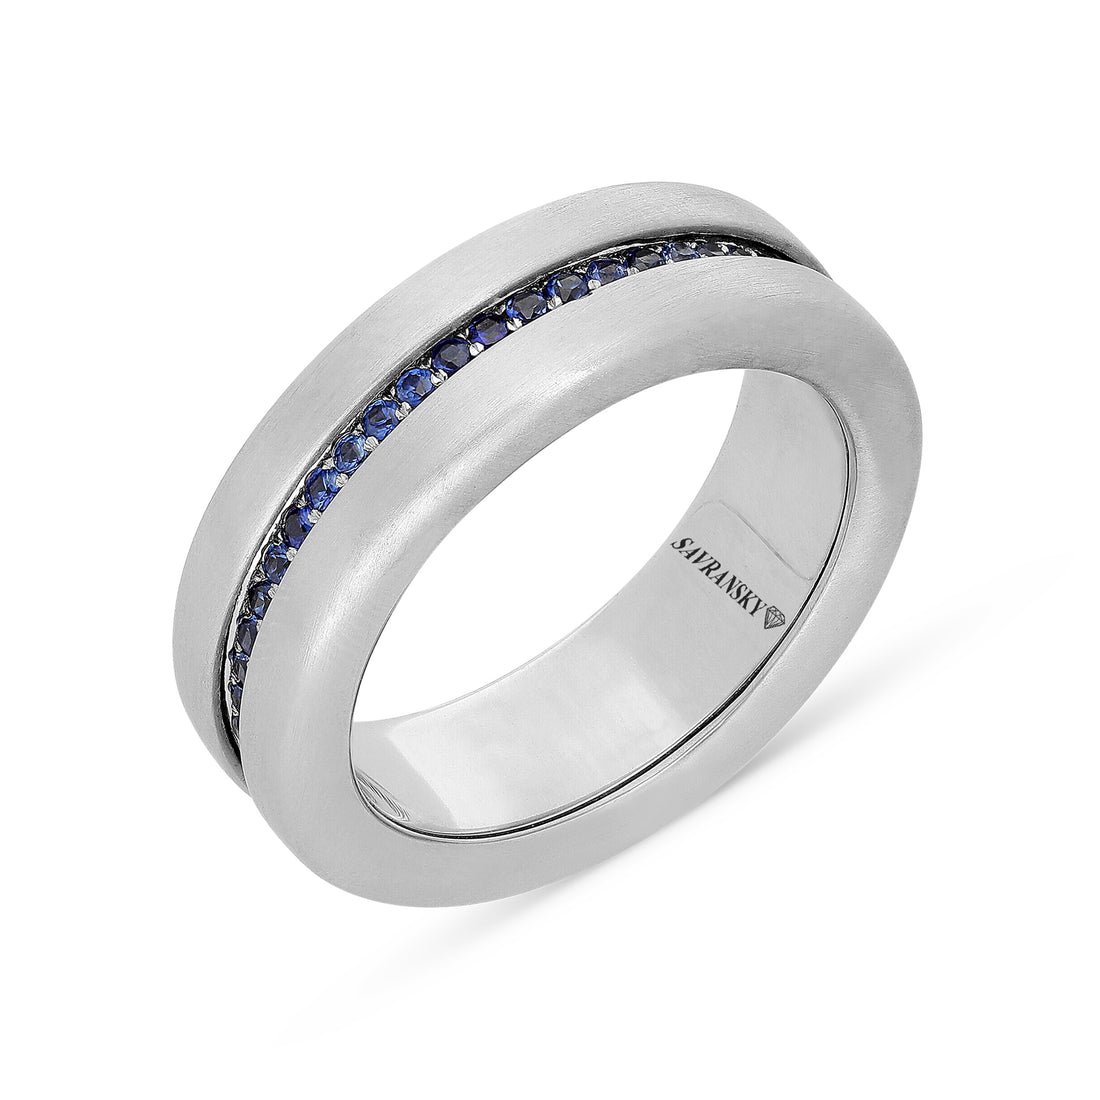 Spinning Wedding Band Ring in Blue Sapphire & White Diamonds